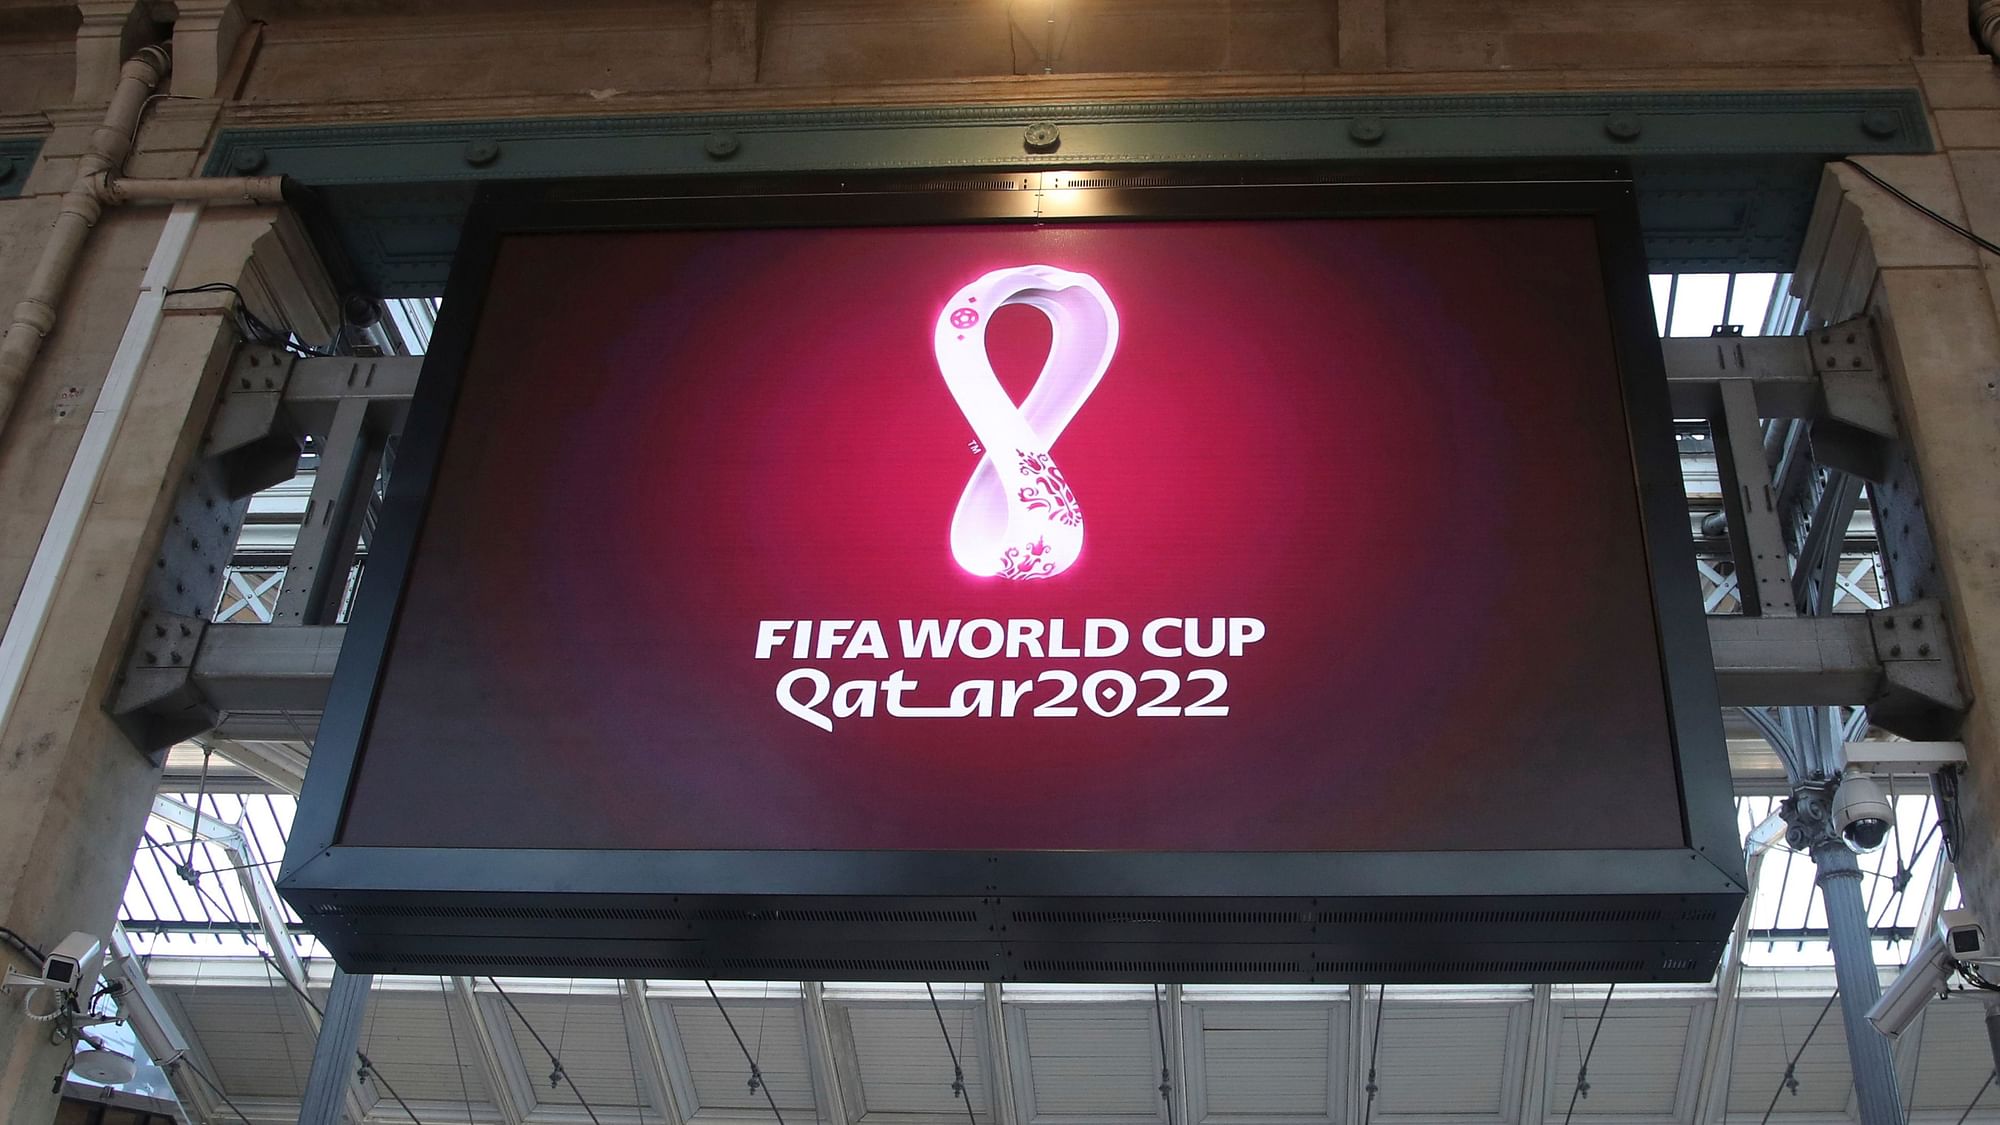 The Qatar 2022 World Cup logo is displayed on a giant screen at the Gare du Nord train station, on the occasion of its worldwide launch, in Paris on Tuesday, 3 September.